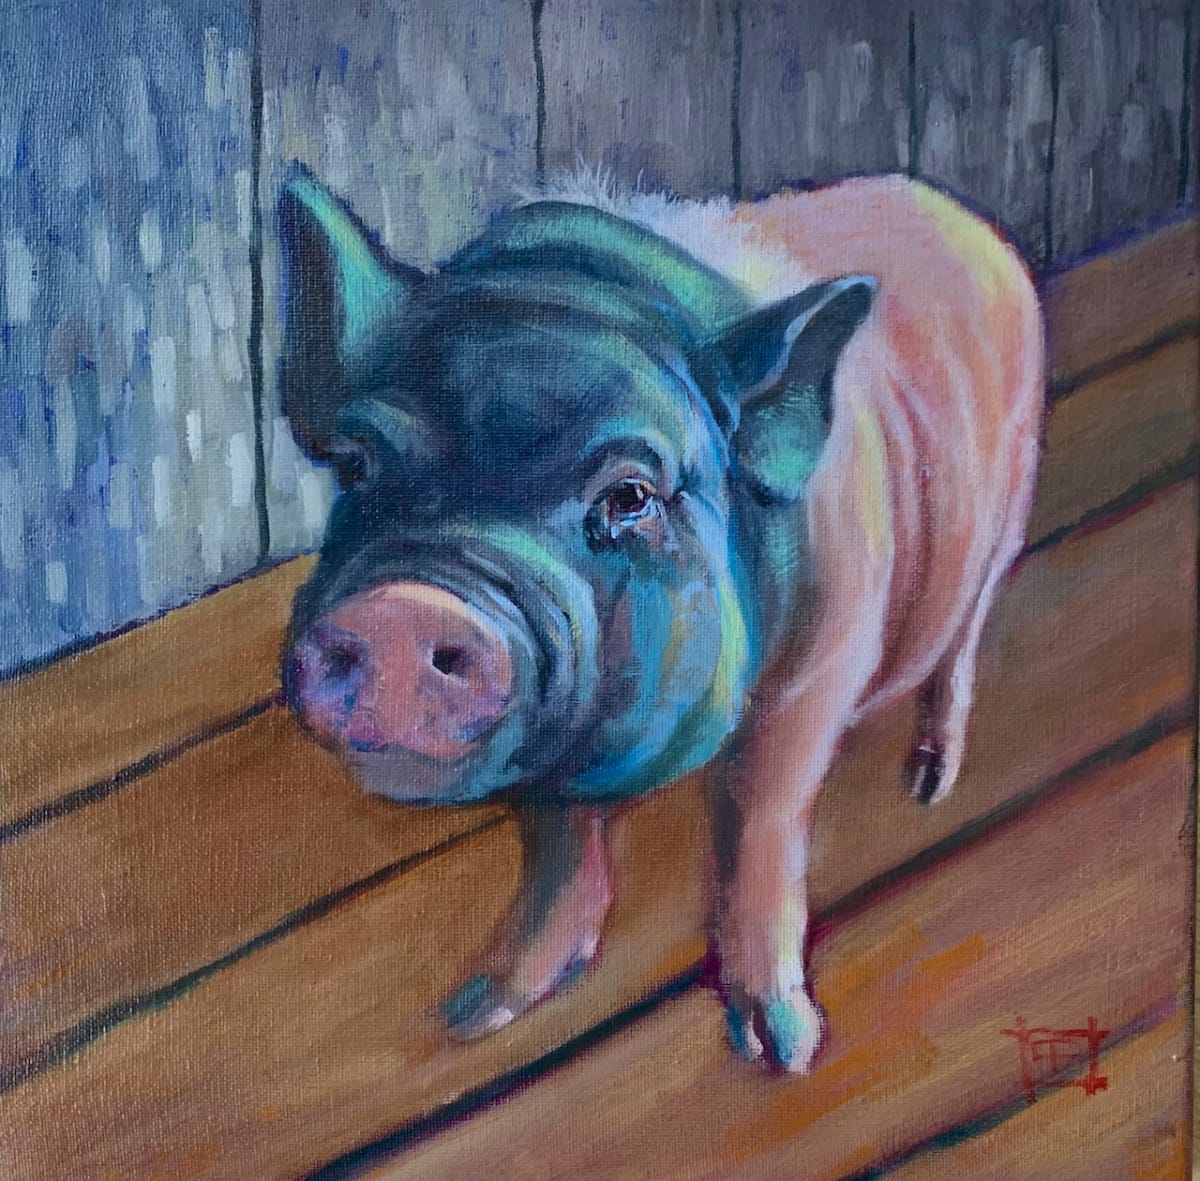 Baby Pig by Cheryl Feng  Image: Baby Pig by Cheryl Feng